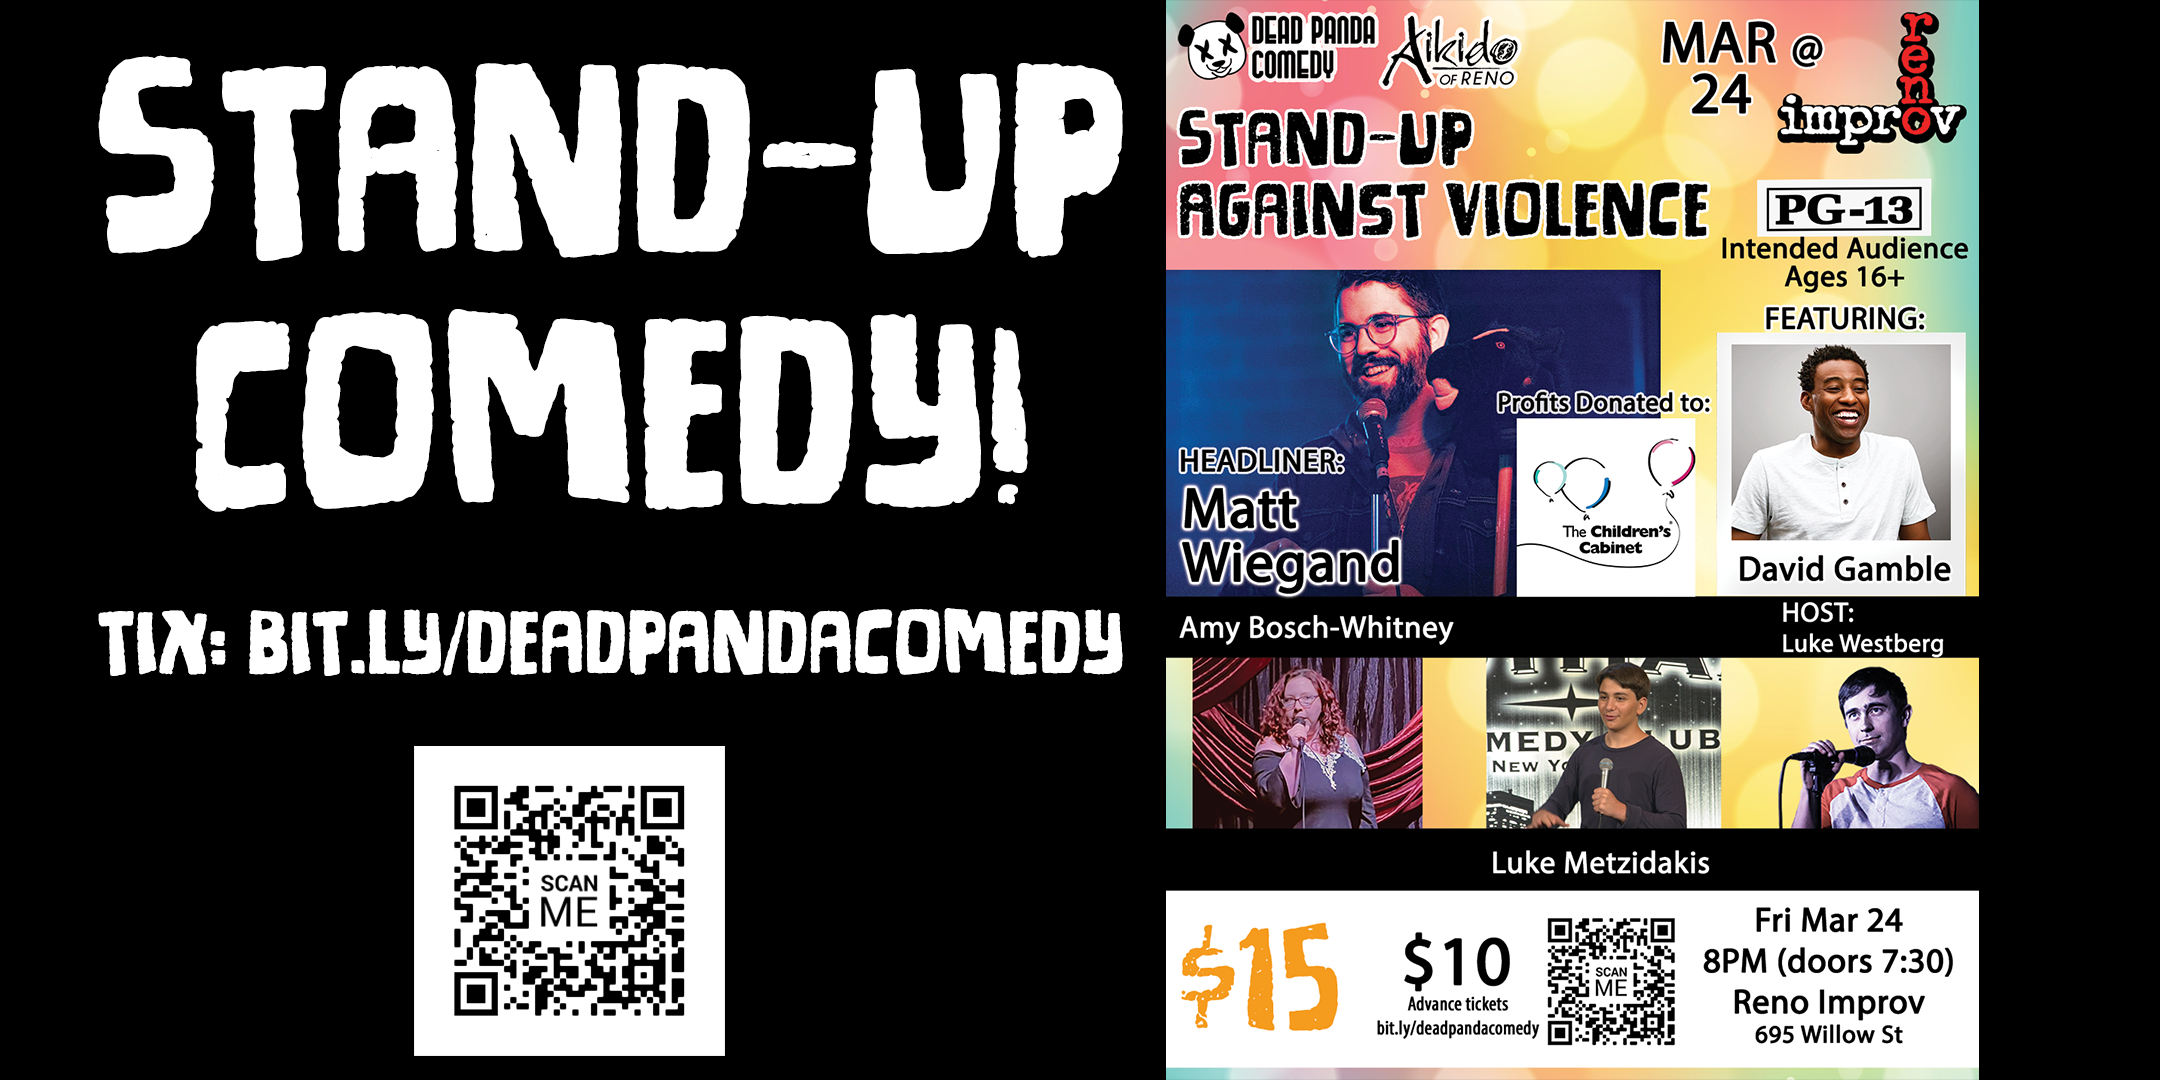 Standup against violence charity event